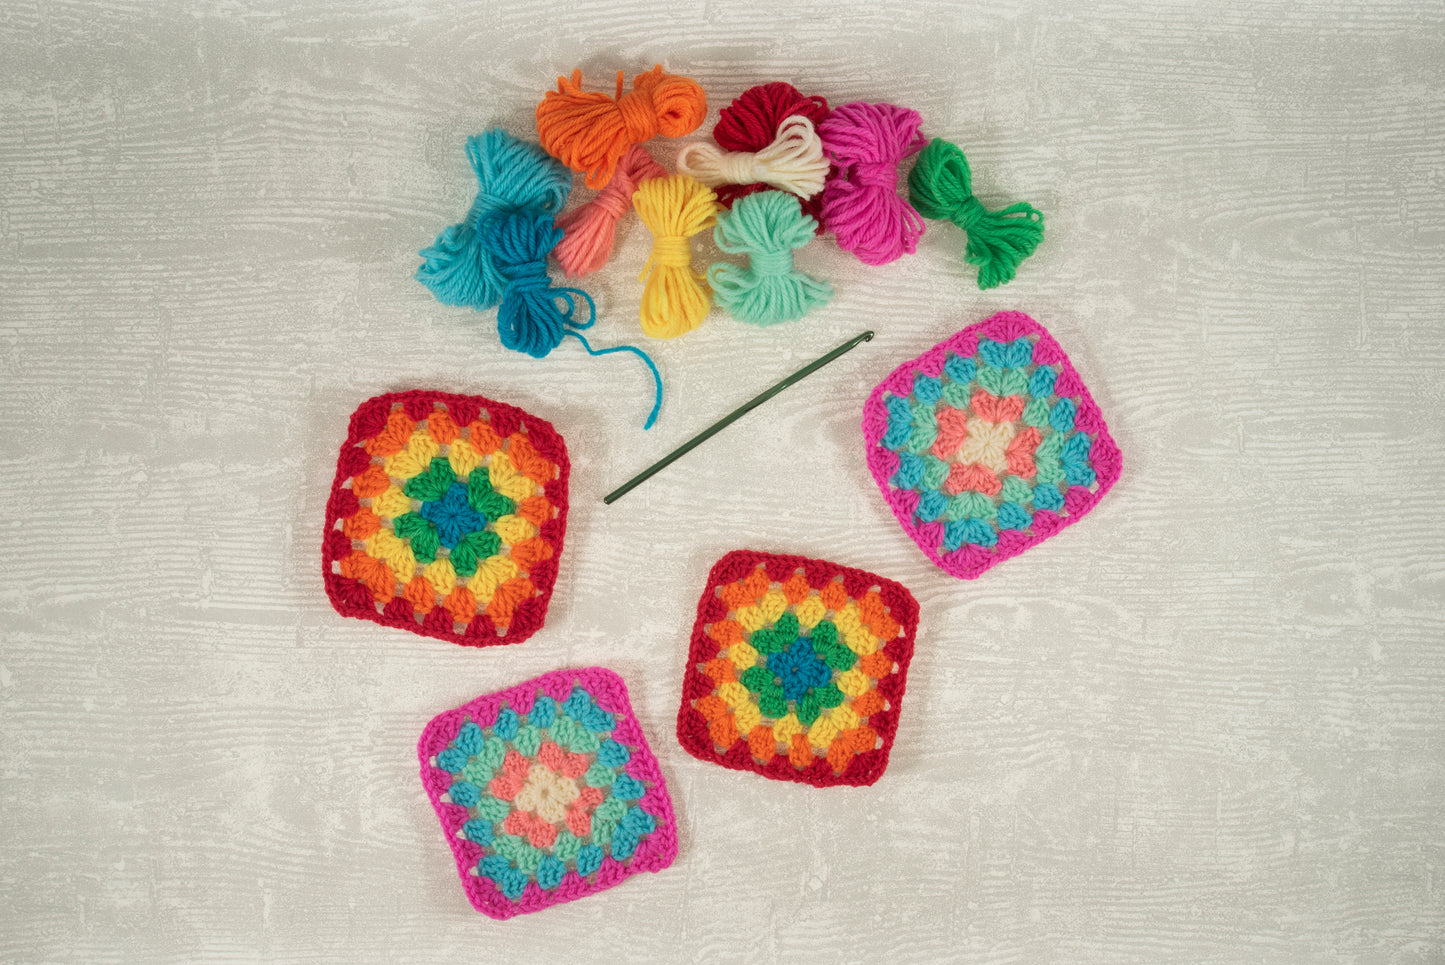 MY FIRST CROCHET KIT - GRANNY SQUARES